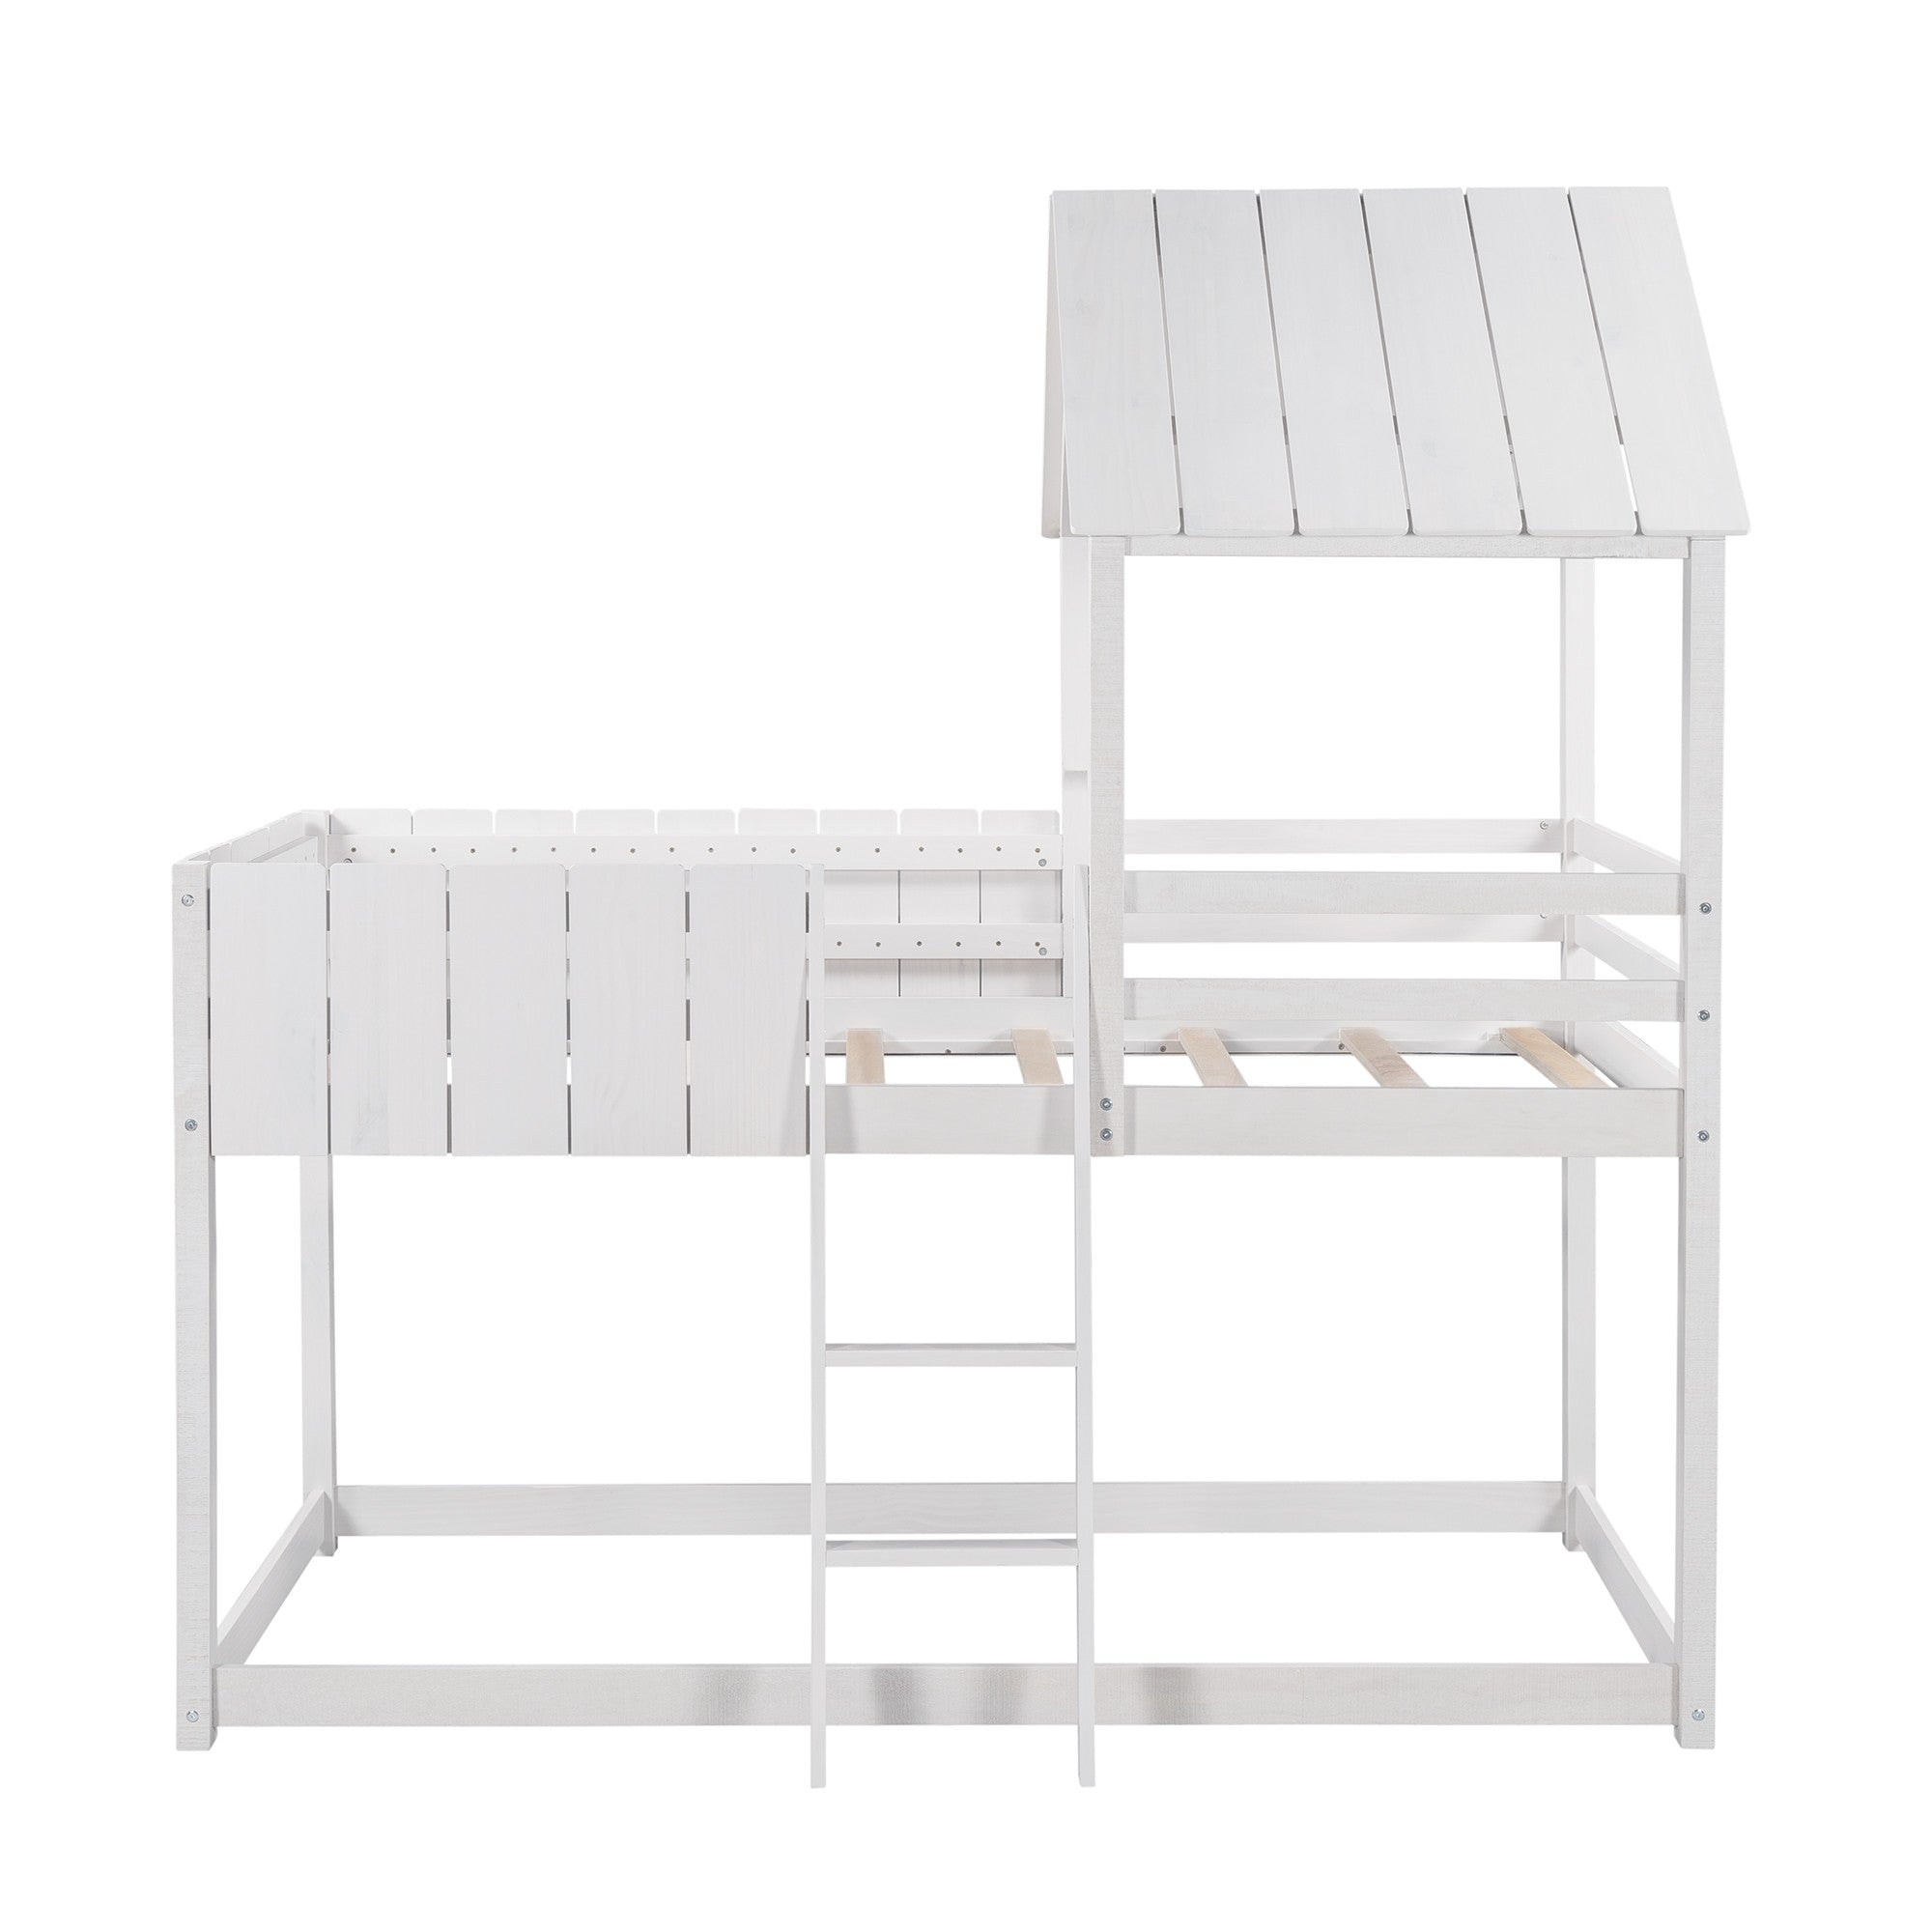 Wash White Double Twin Size Bunk Bed with Roof